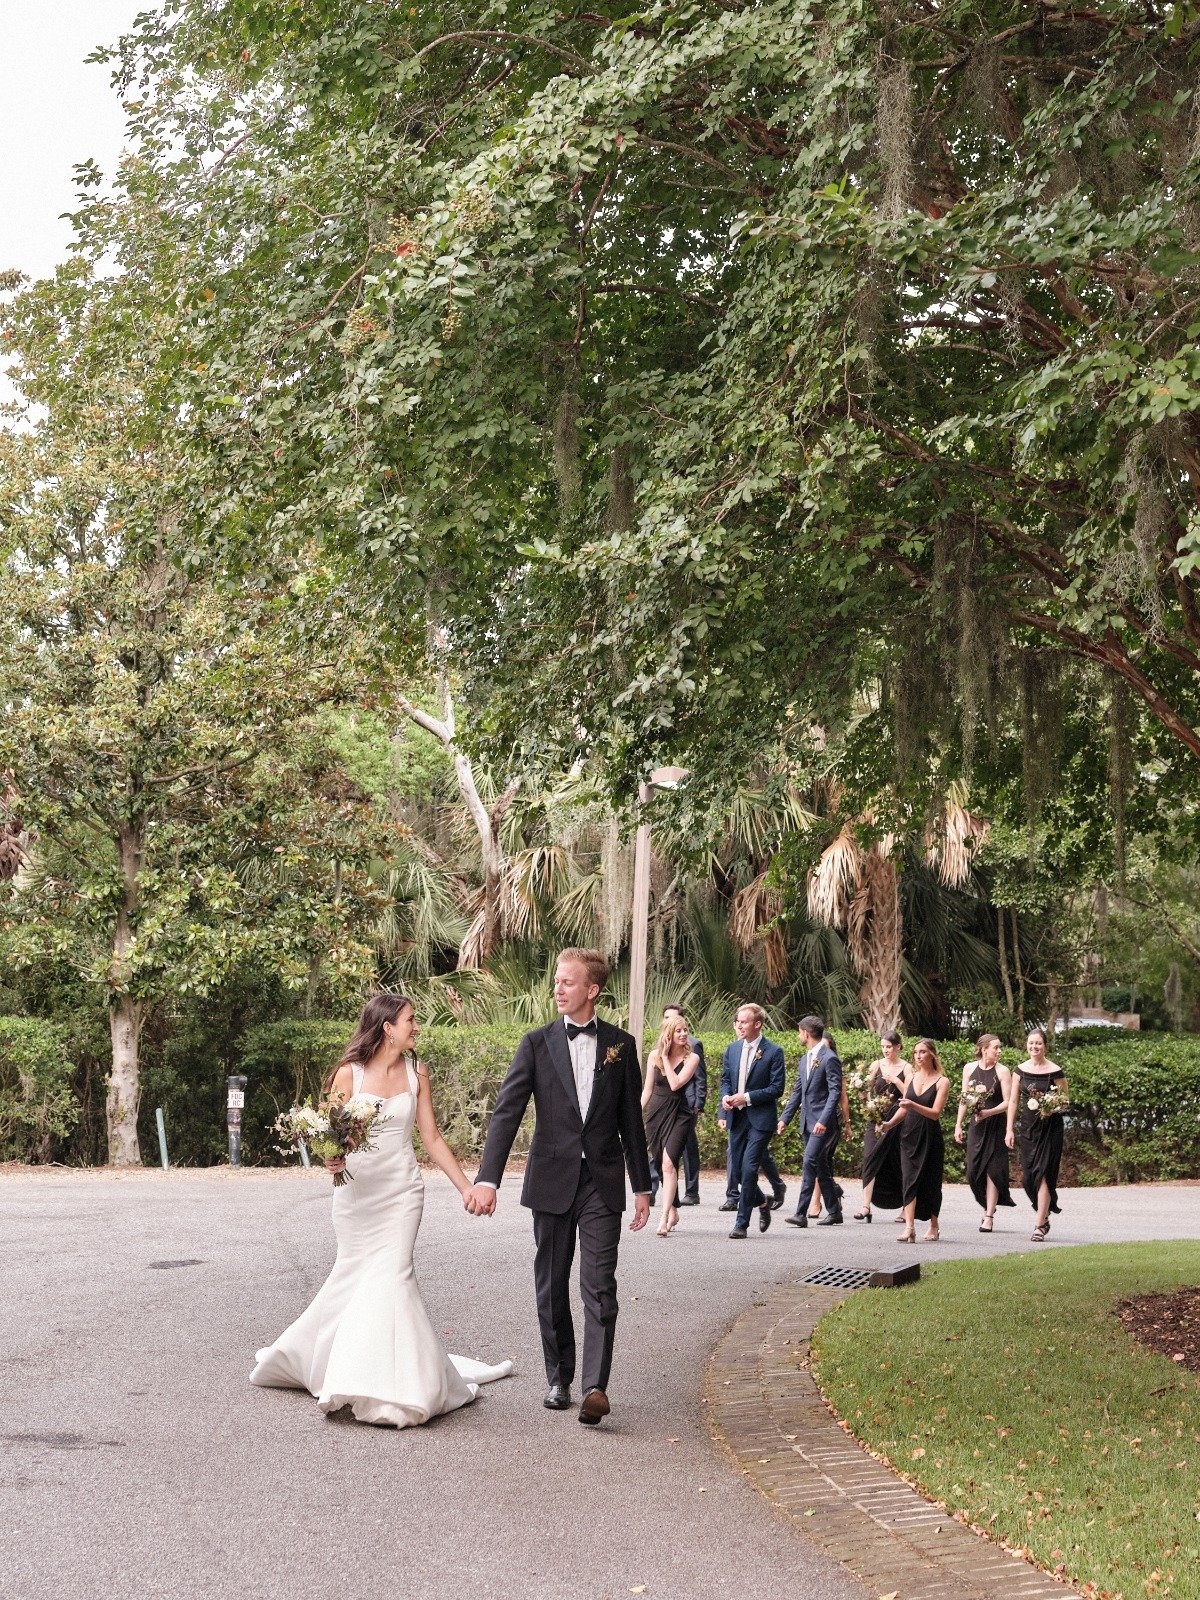 Bride and groom holding hands followed by wedding party